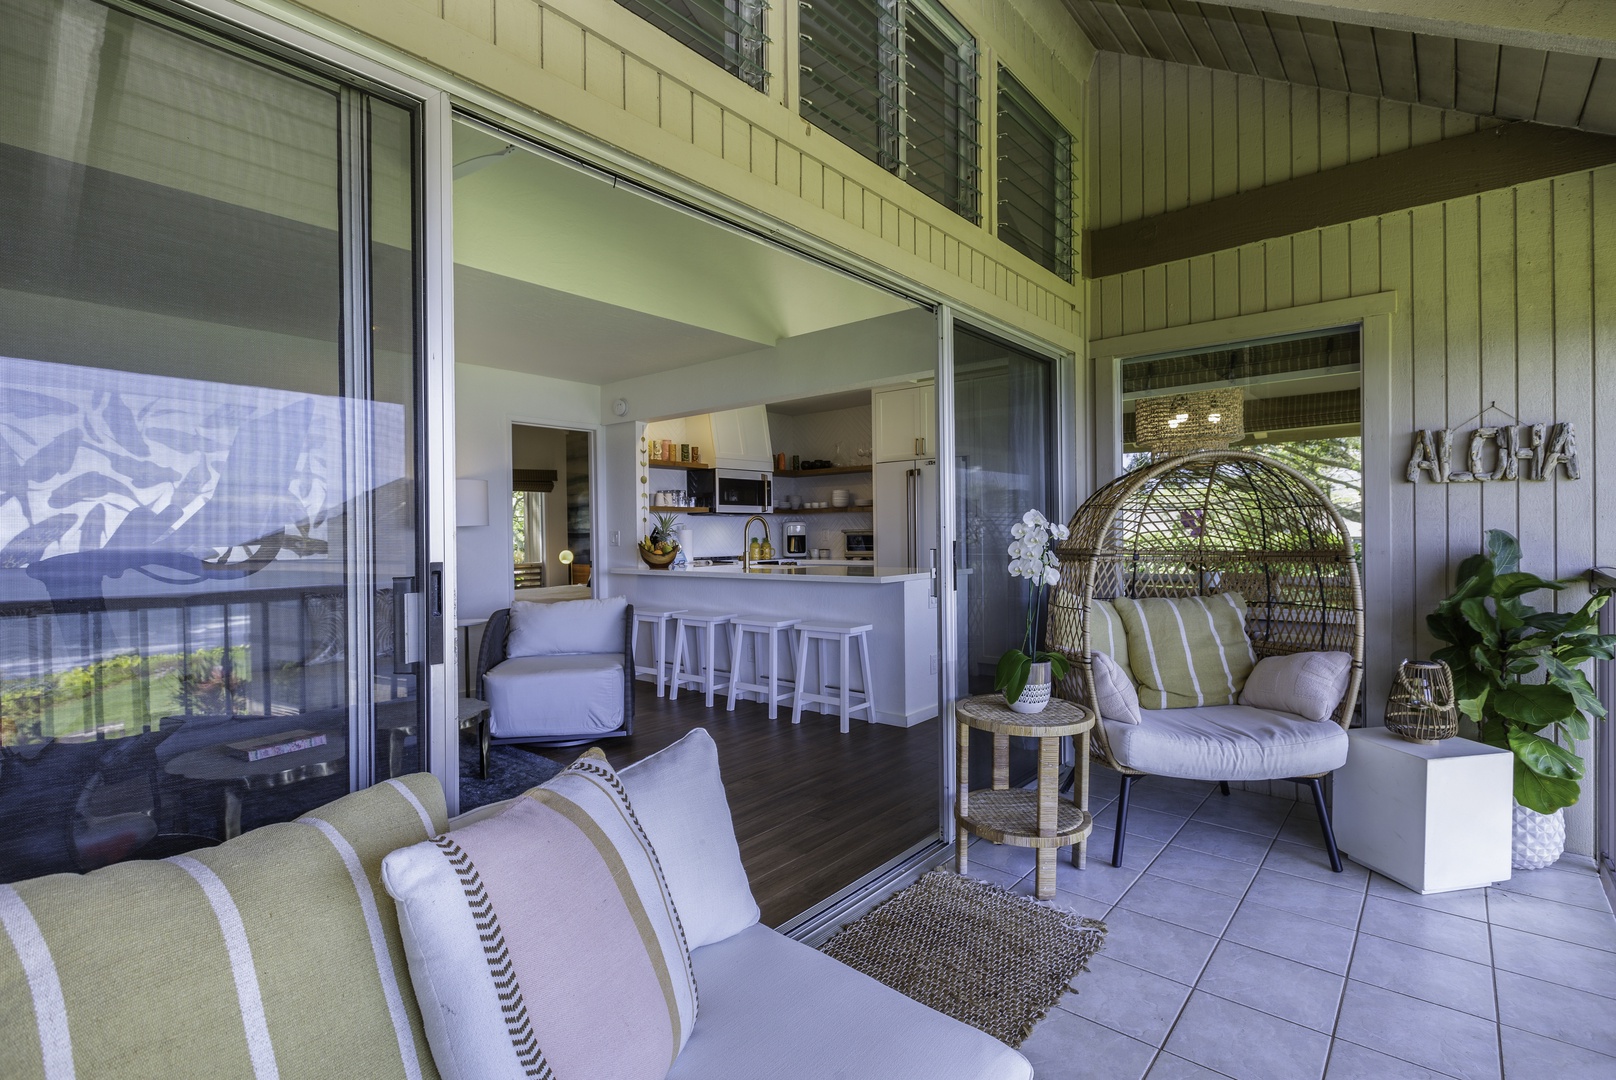 Princeville Vacation Rentals, Pali Ke Kua 207 - Expansive glass sliders connect the living room to the sizable lanai, where ocean breezes, sea and garden views, and outdoor dining options await you